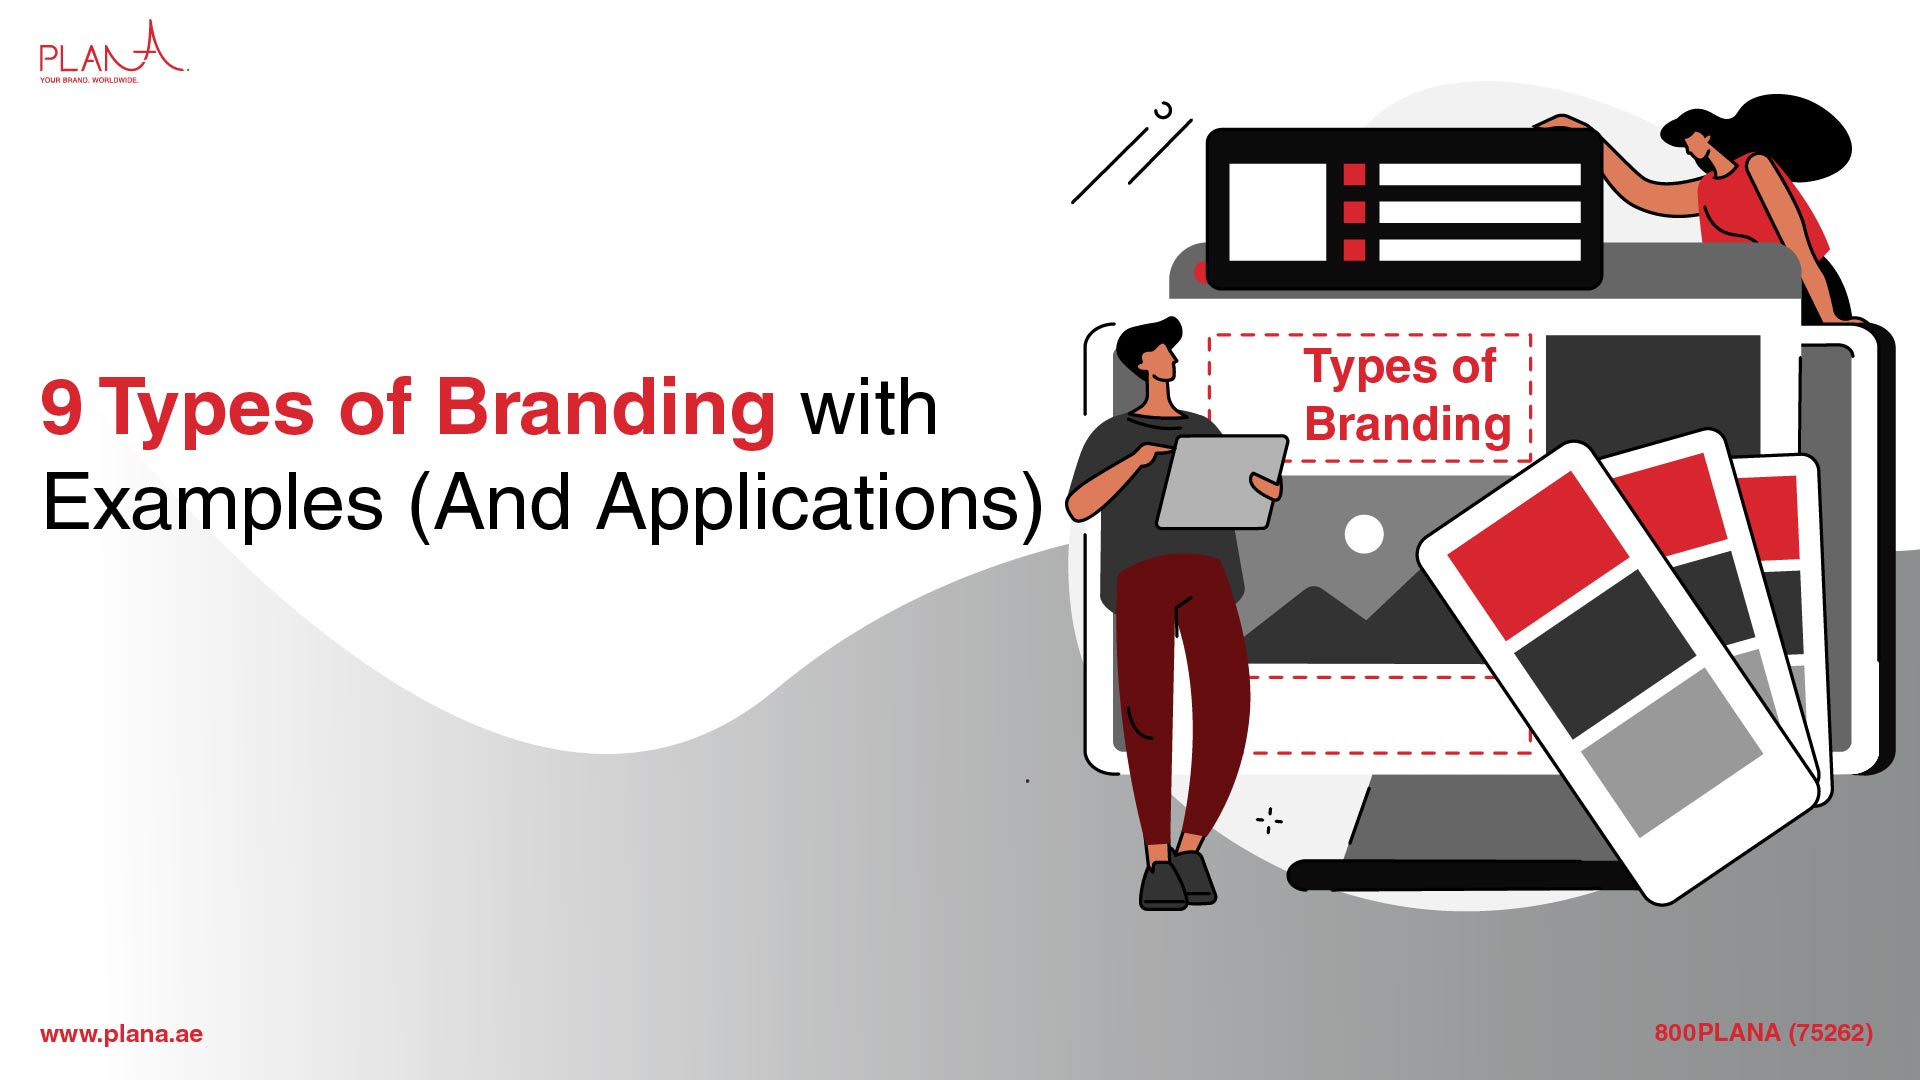 9 Types of Branding with Examples (And Applications)